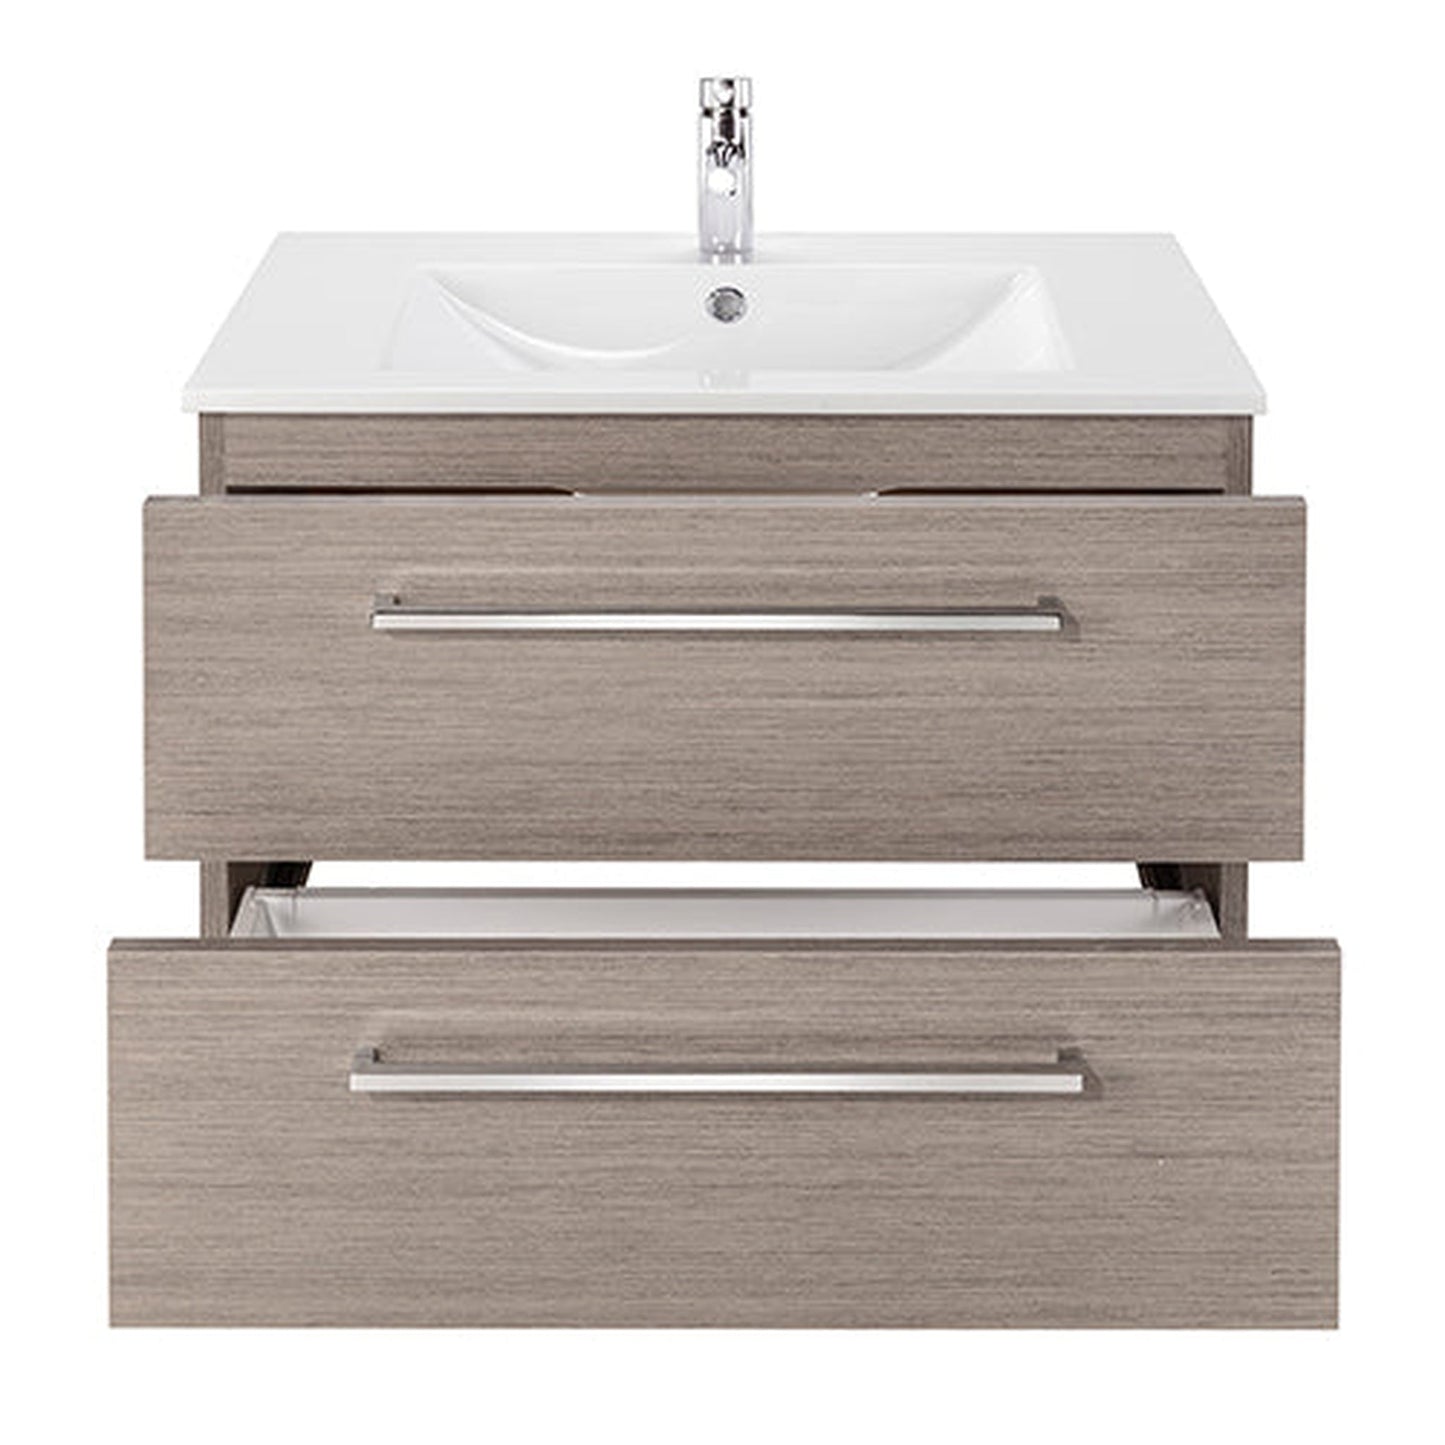 Abby Bath Aiden 30” x 20” Wall-Mounted Vanity in Slate Finish With Two Drawers and Chrome Handles